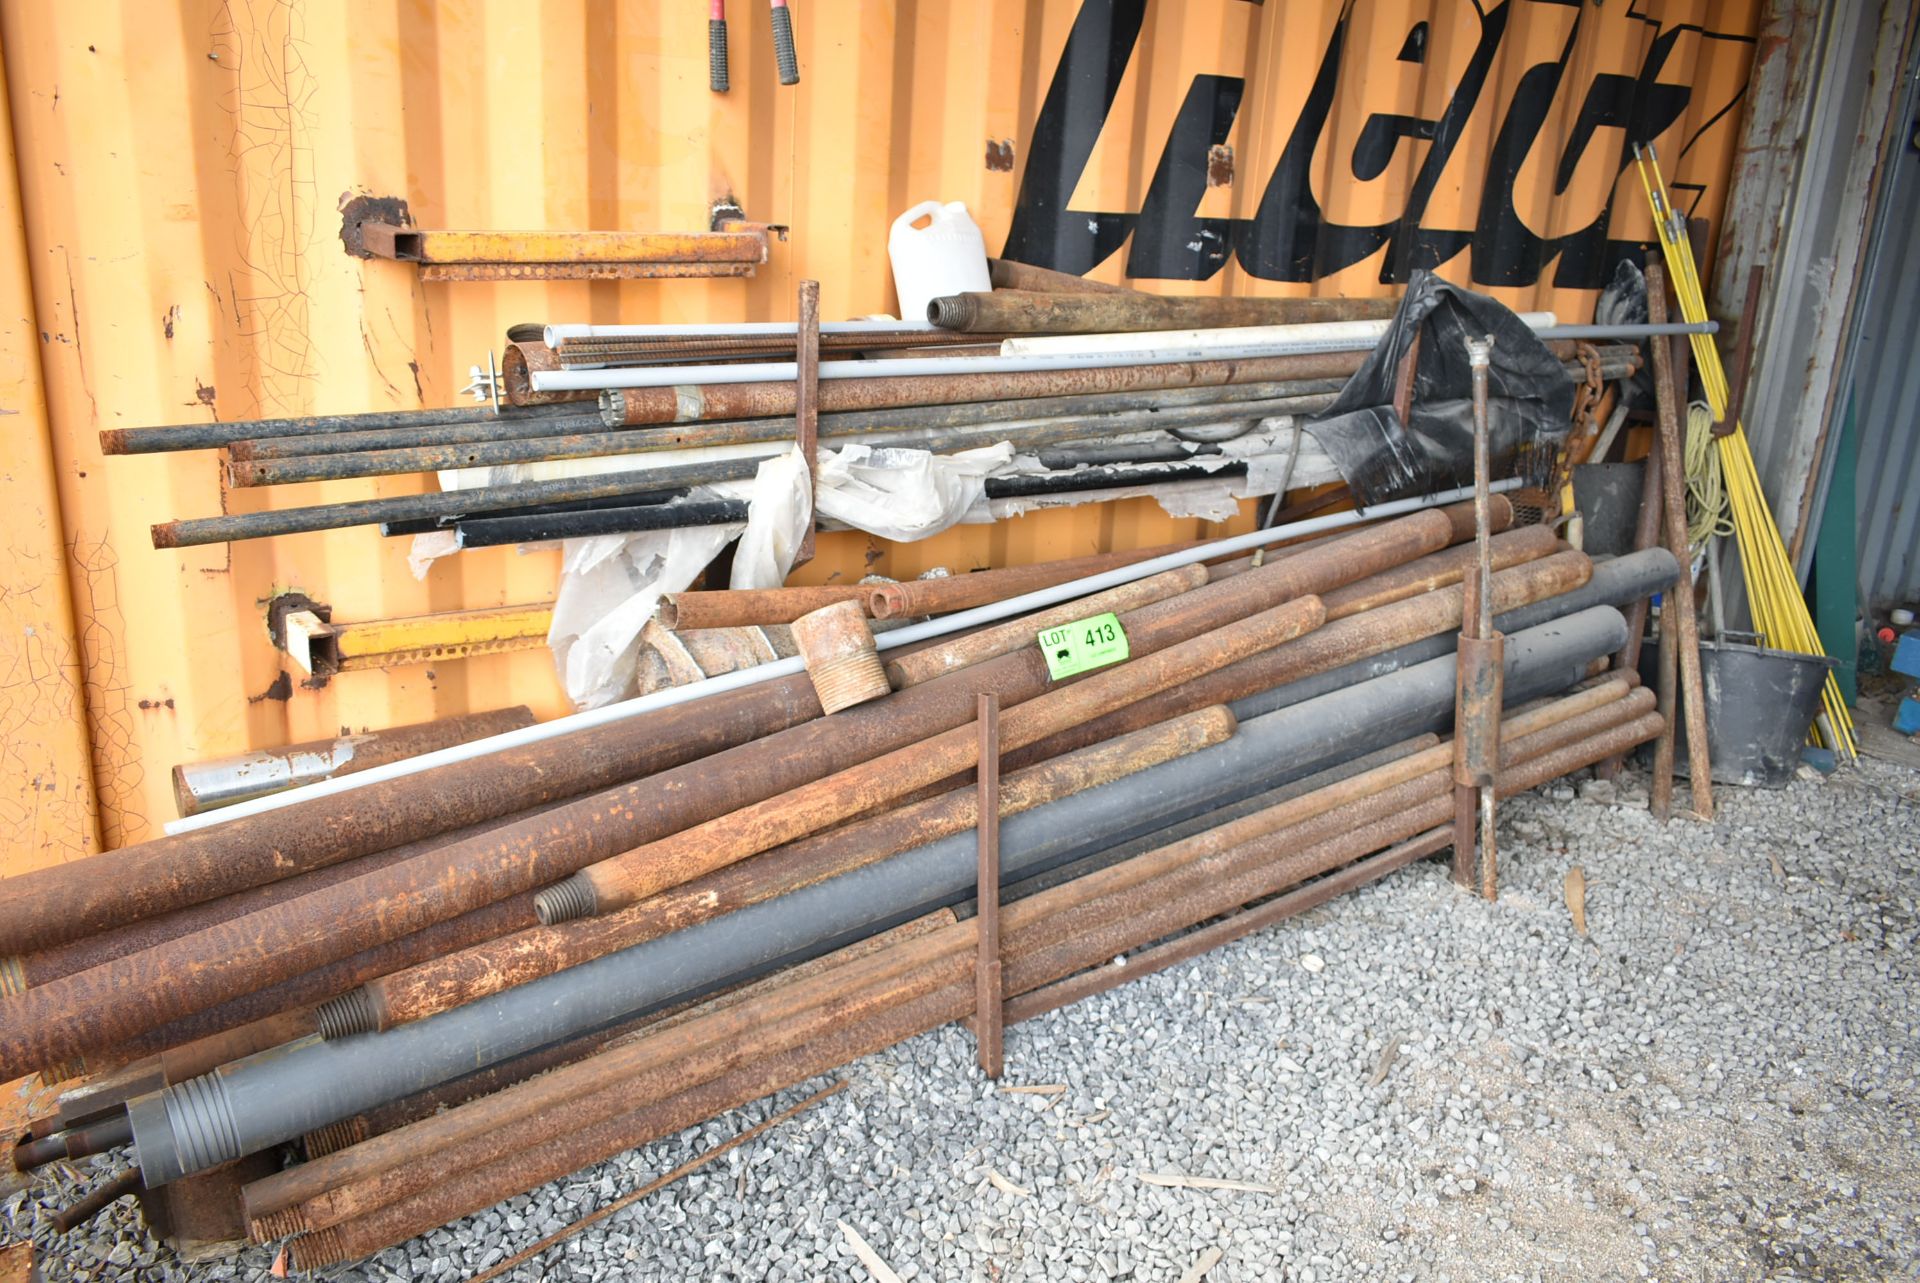 LOT/ CONTENTS OF RACK CONSISTING OF STEEL PIPE